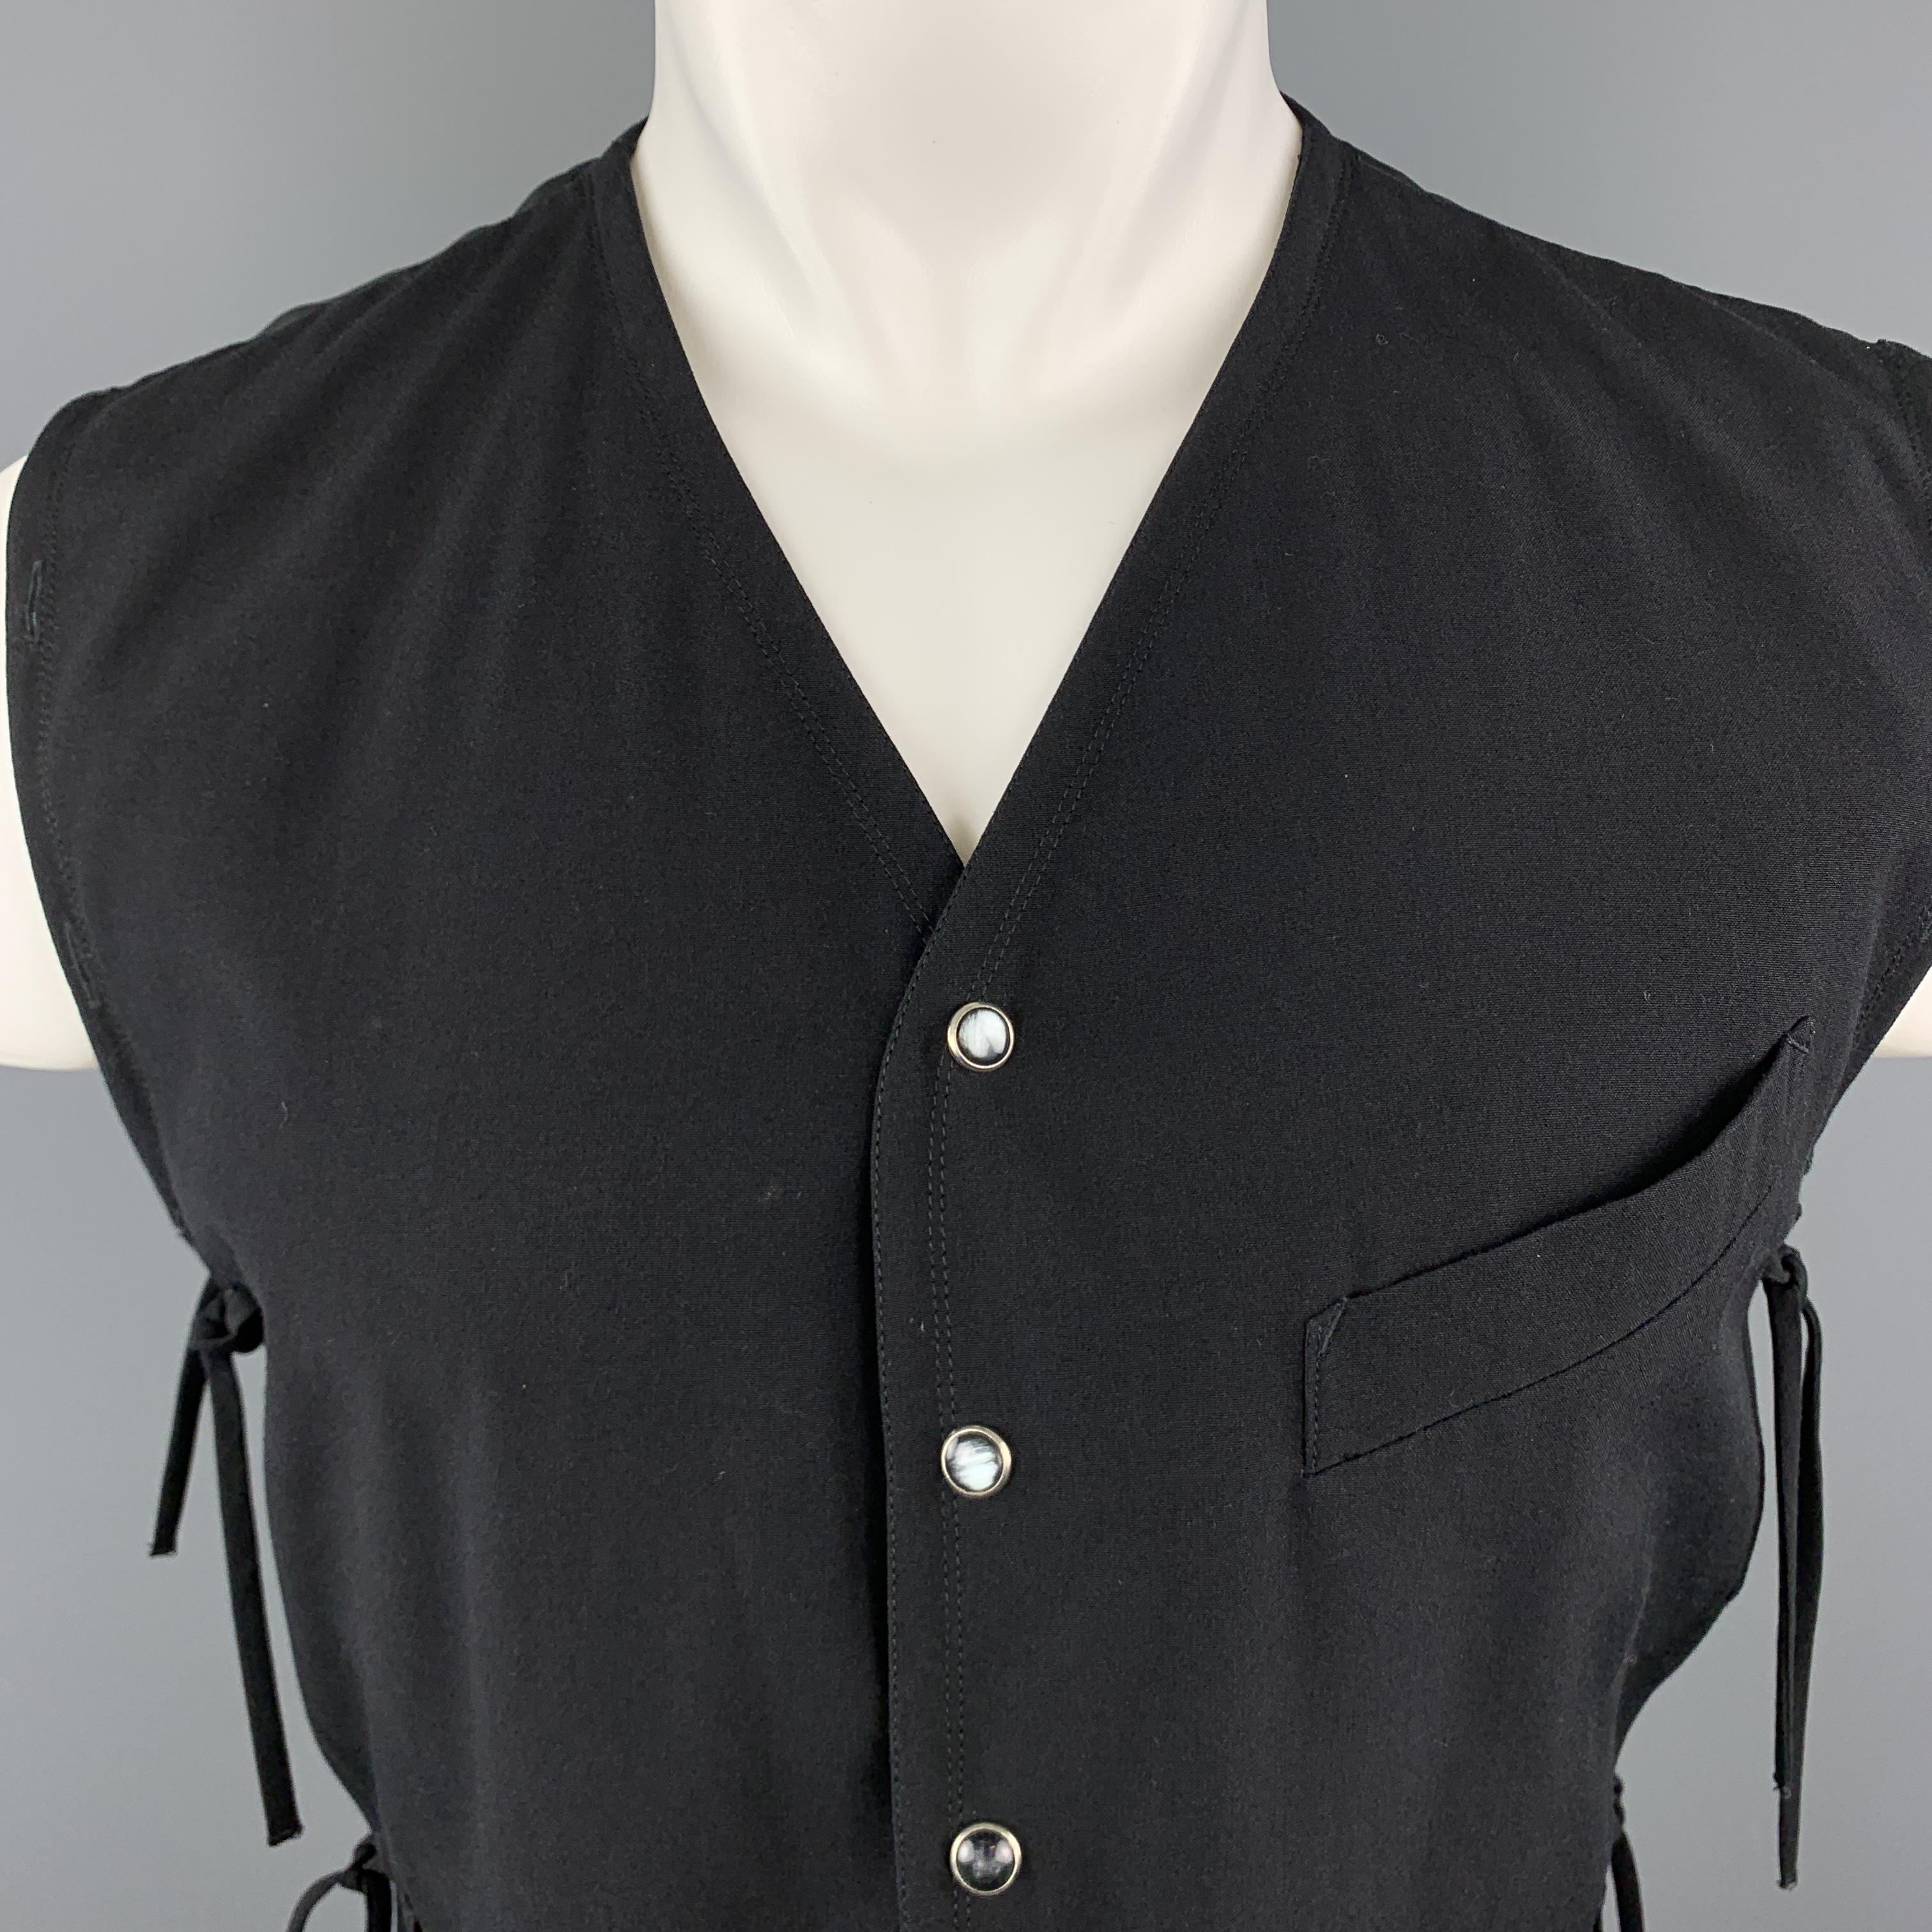 Vintage JEAN PAUL GAULTIER HOMME vest comes in black wool with a V neck, pearl snap up front, cropped hem, and button hole trim with tied sides. Missing middle ties. Otherwise excellent condition. As-is. Made in Italy.

Very Good Pre-Owned